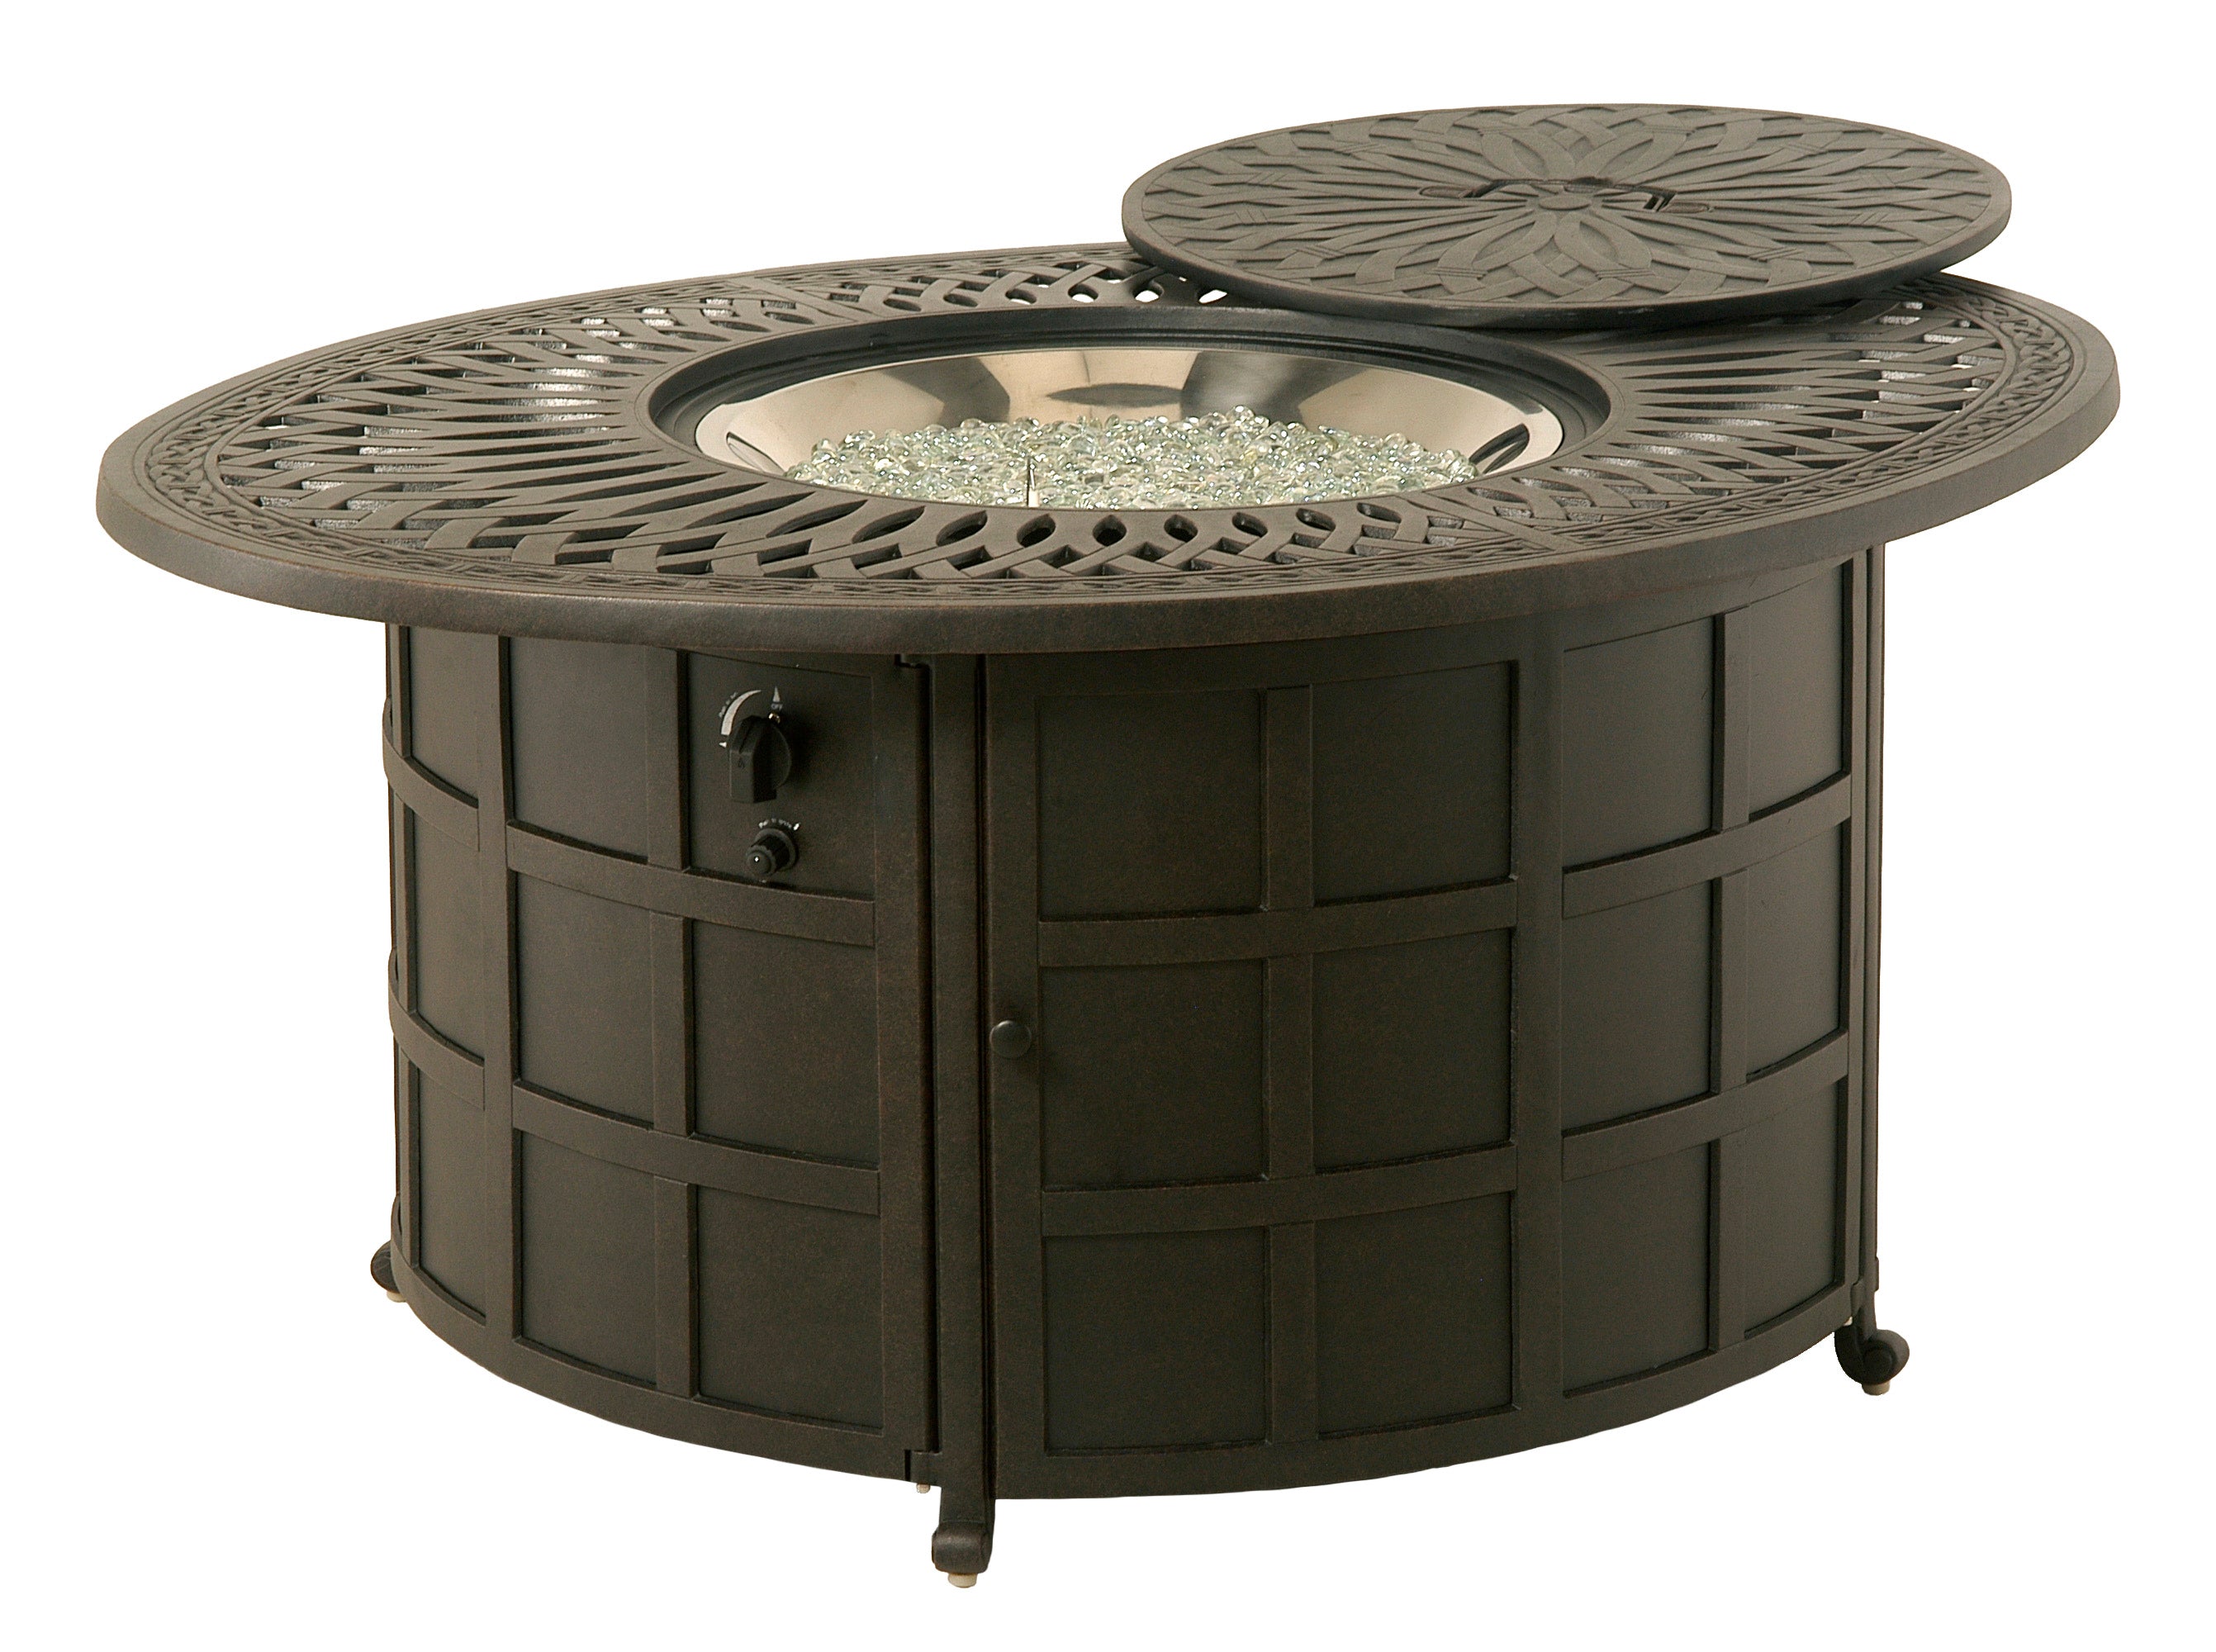 Hanamint Mayfair Oval Enclosed Gas Fire Pit Table Fireplaces 12039141